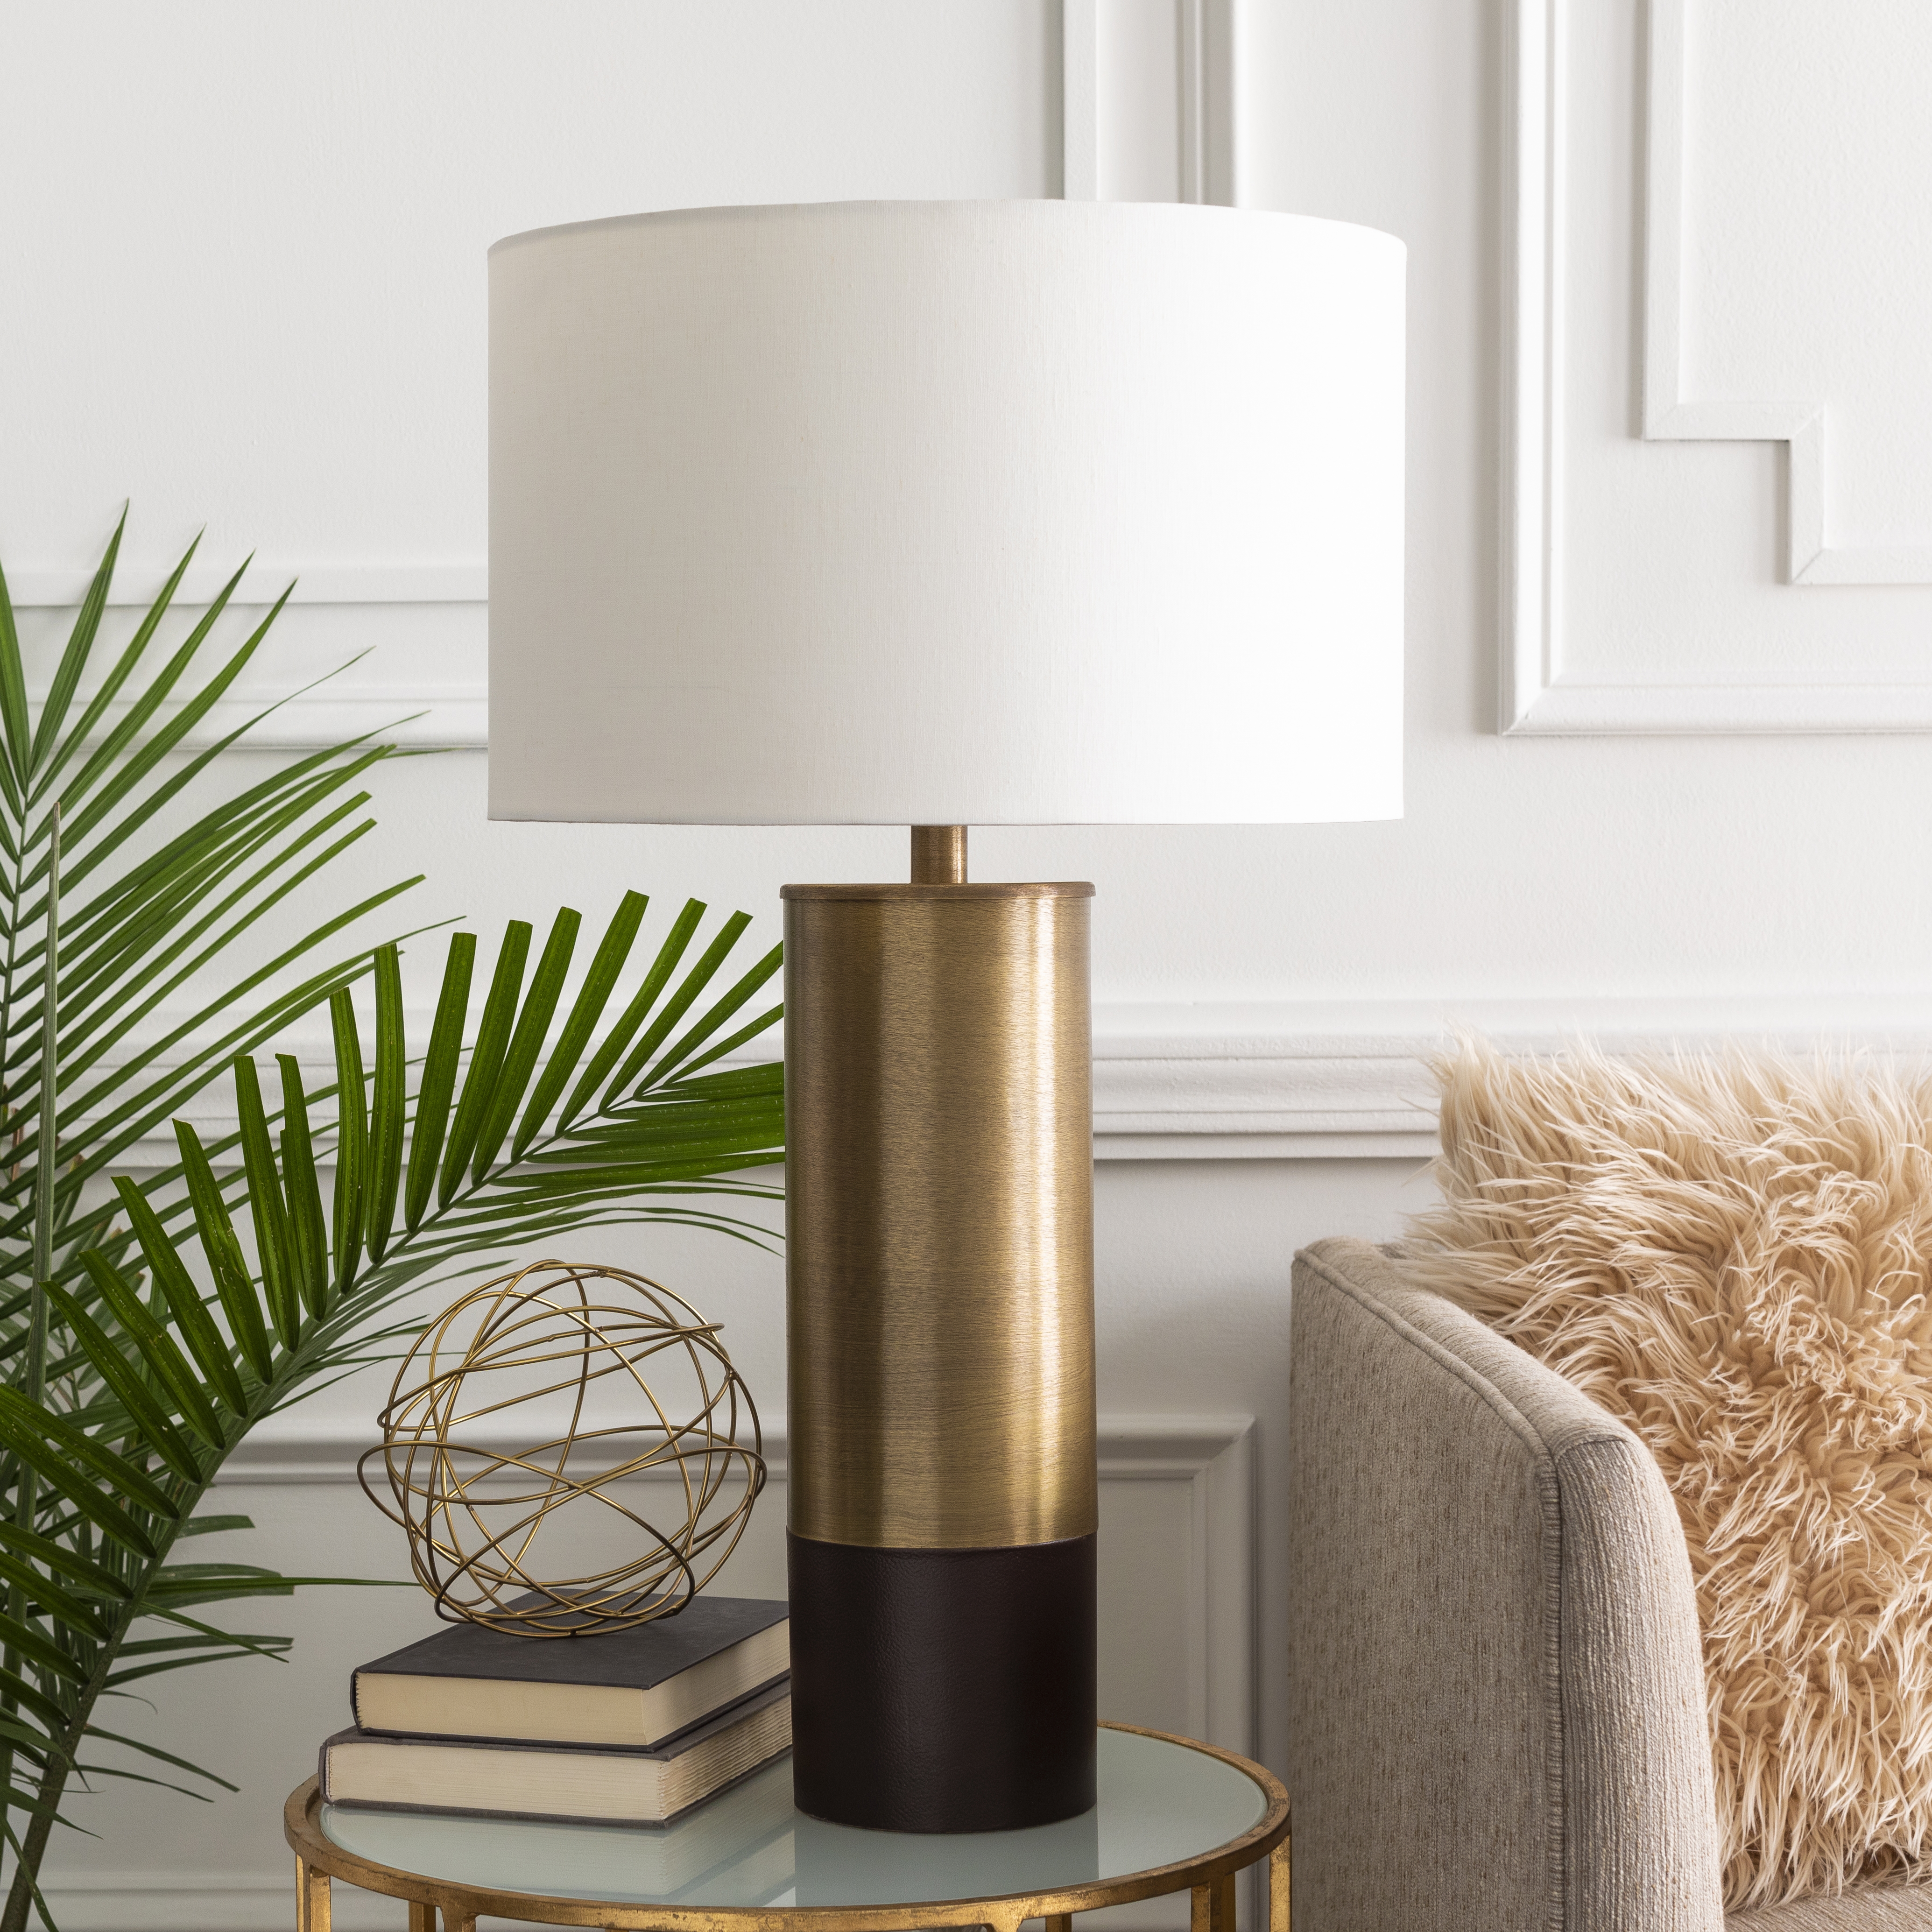 Nelson - 16"W x 27.00"H Table Lamp - Image 1